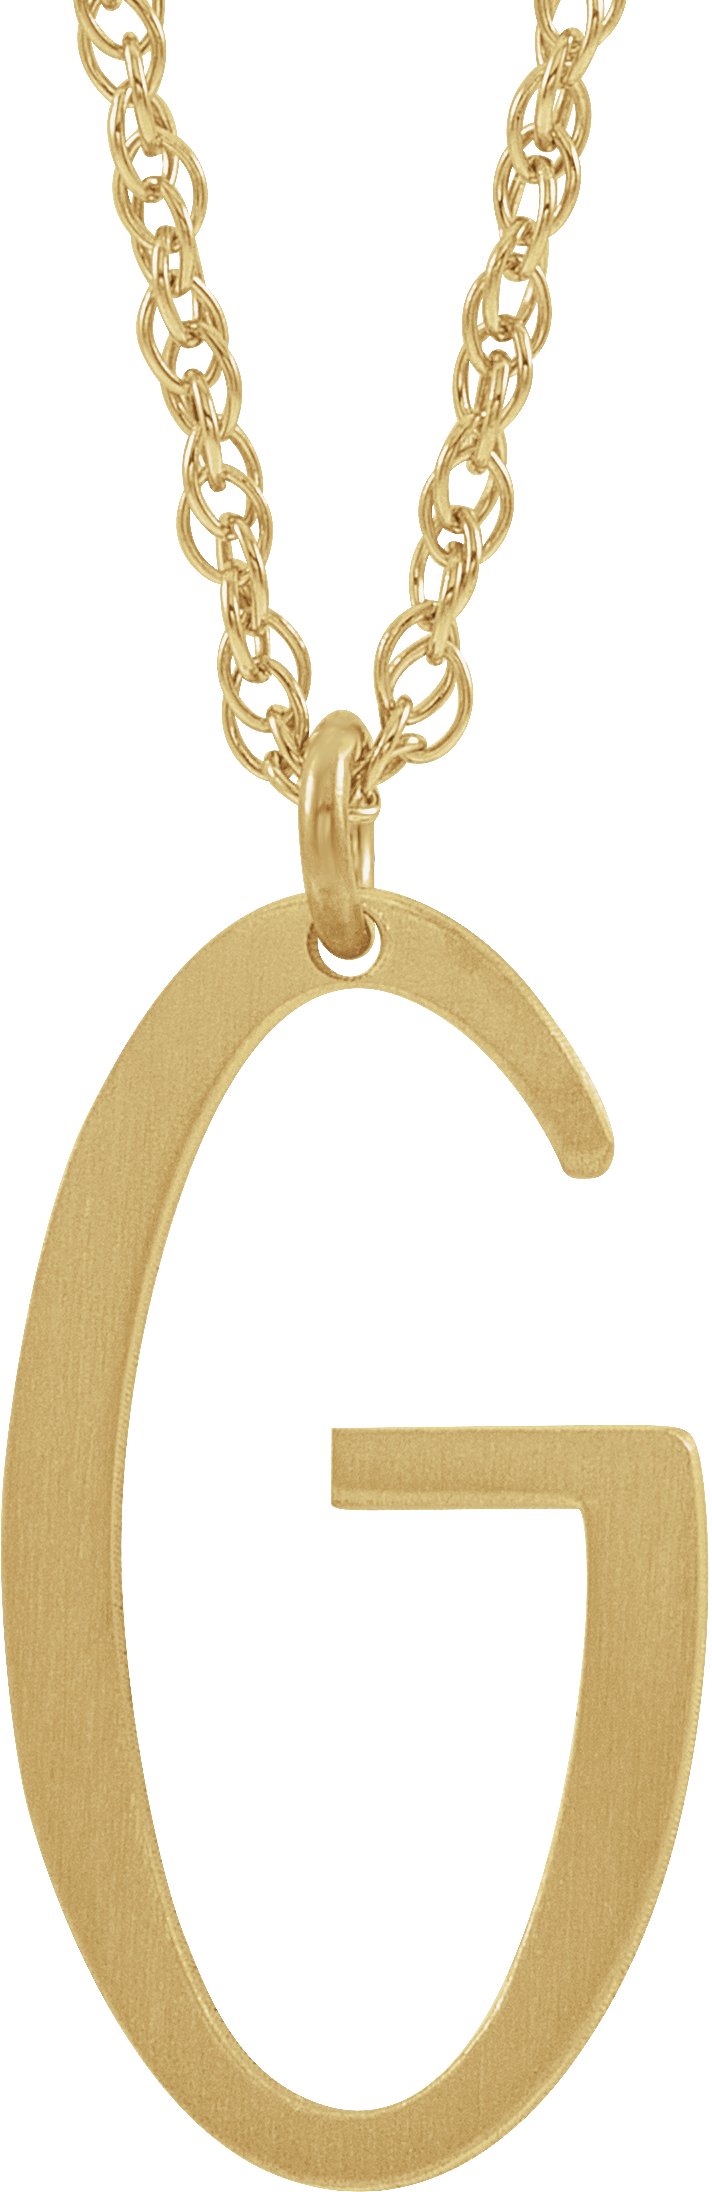 14K Yellow Gold-Plated Sterling Silver Block Initial G 16-18" Necklace with Brush Finish